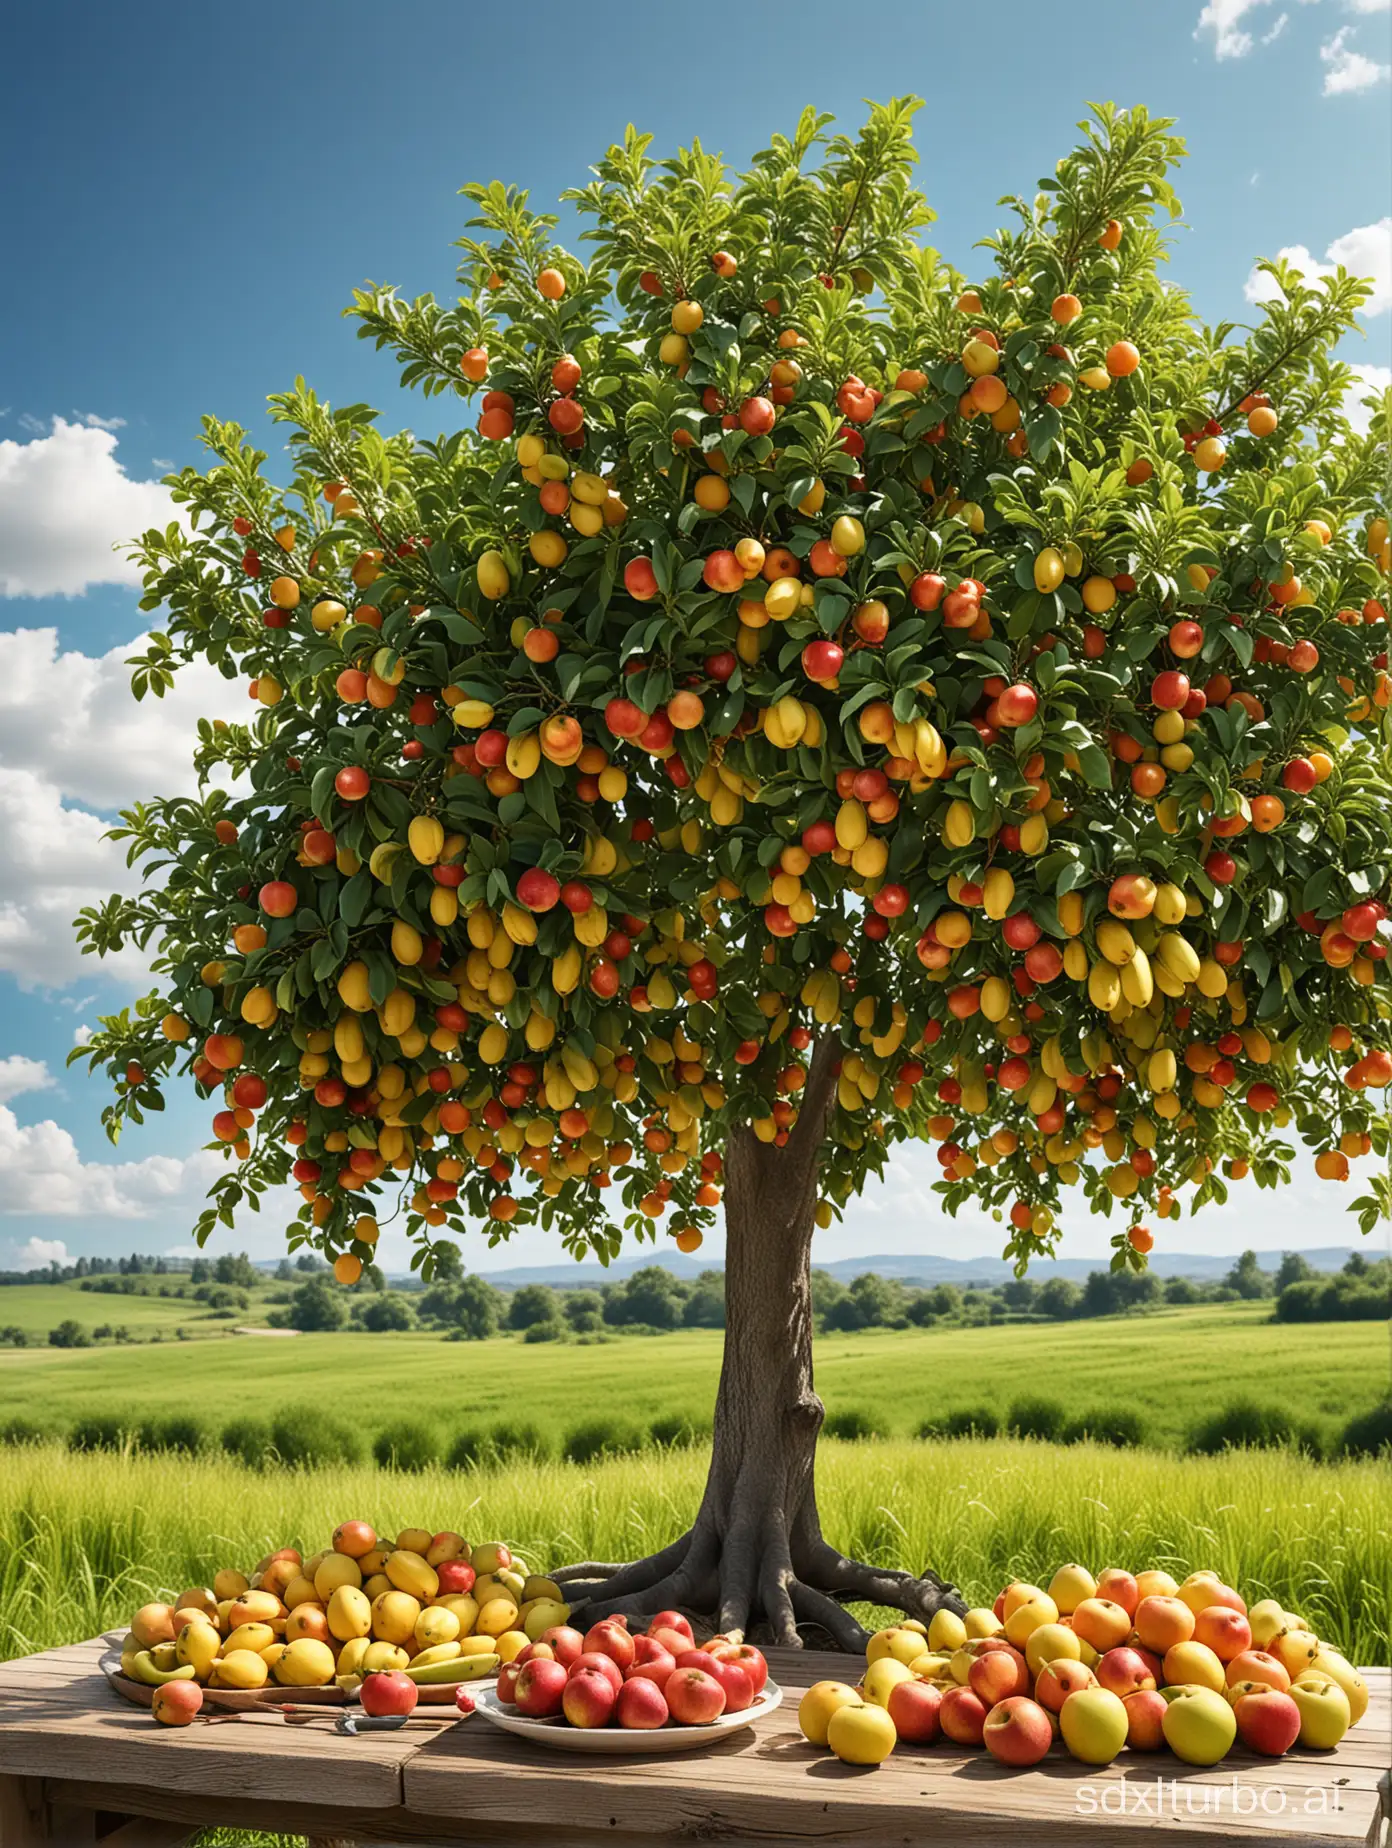 Draw a realistic e-commerce live background: a mature fruit tree, with various fruits hanging on the tree, such as red apples, yellow bananas, green pears, etc. Behind the fruit tree is a lush green grassland and the distant blue sky with white clouds. In the background, you can see the sunlight shining on the leaves and fruits, forming beautiful light and shadow effects. Various fruits are placed on the table, with smooth and translucent surfaces, emitting tempting fragrances. Hope to reflect the true texture and colors of the fruits, allowing the audience to feel the joy of harvest and the freshness of the air.